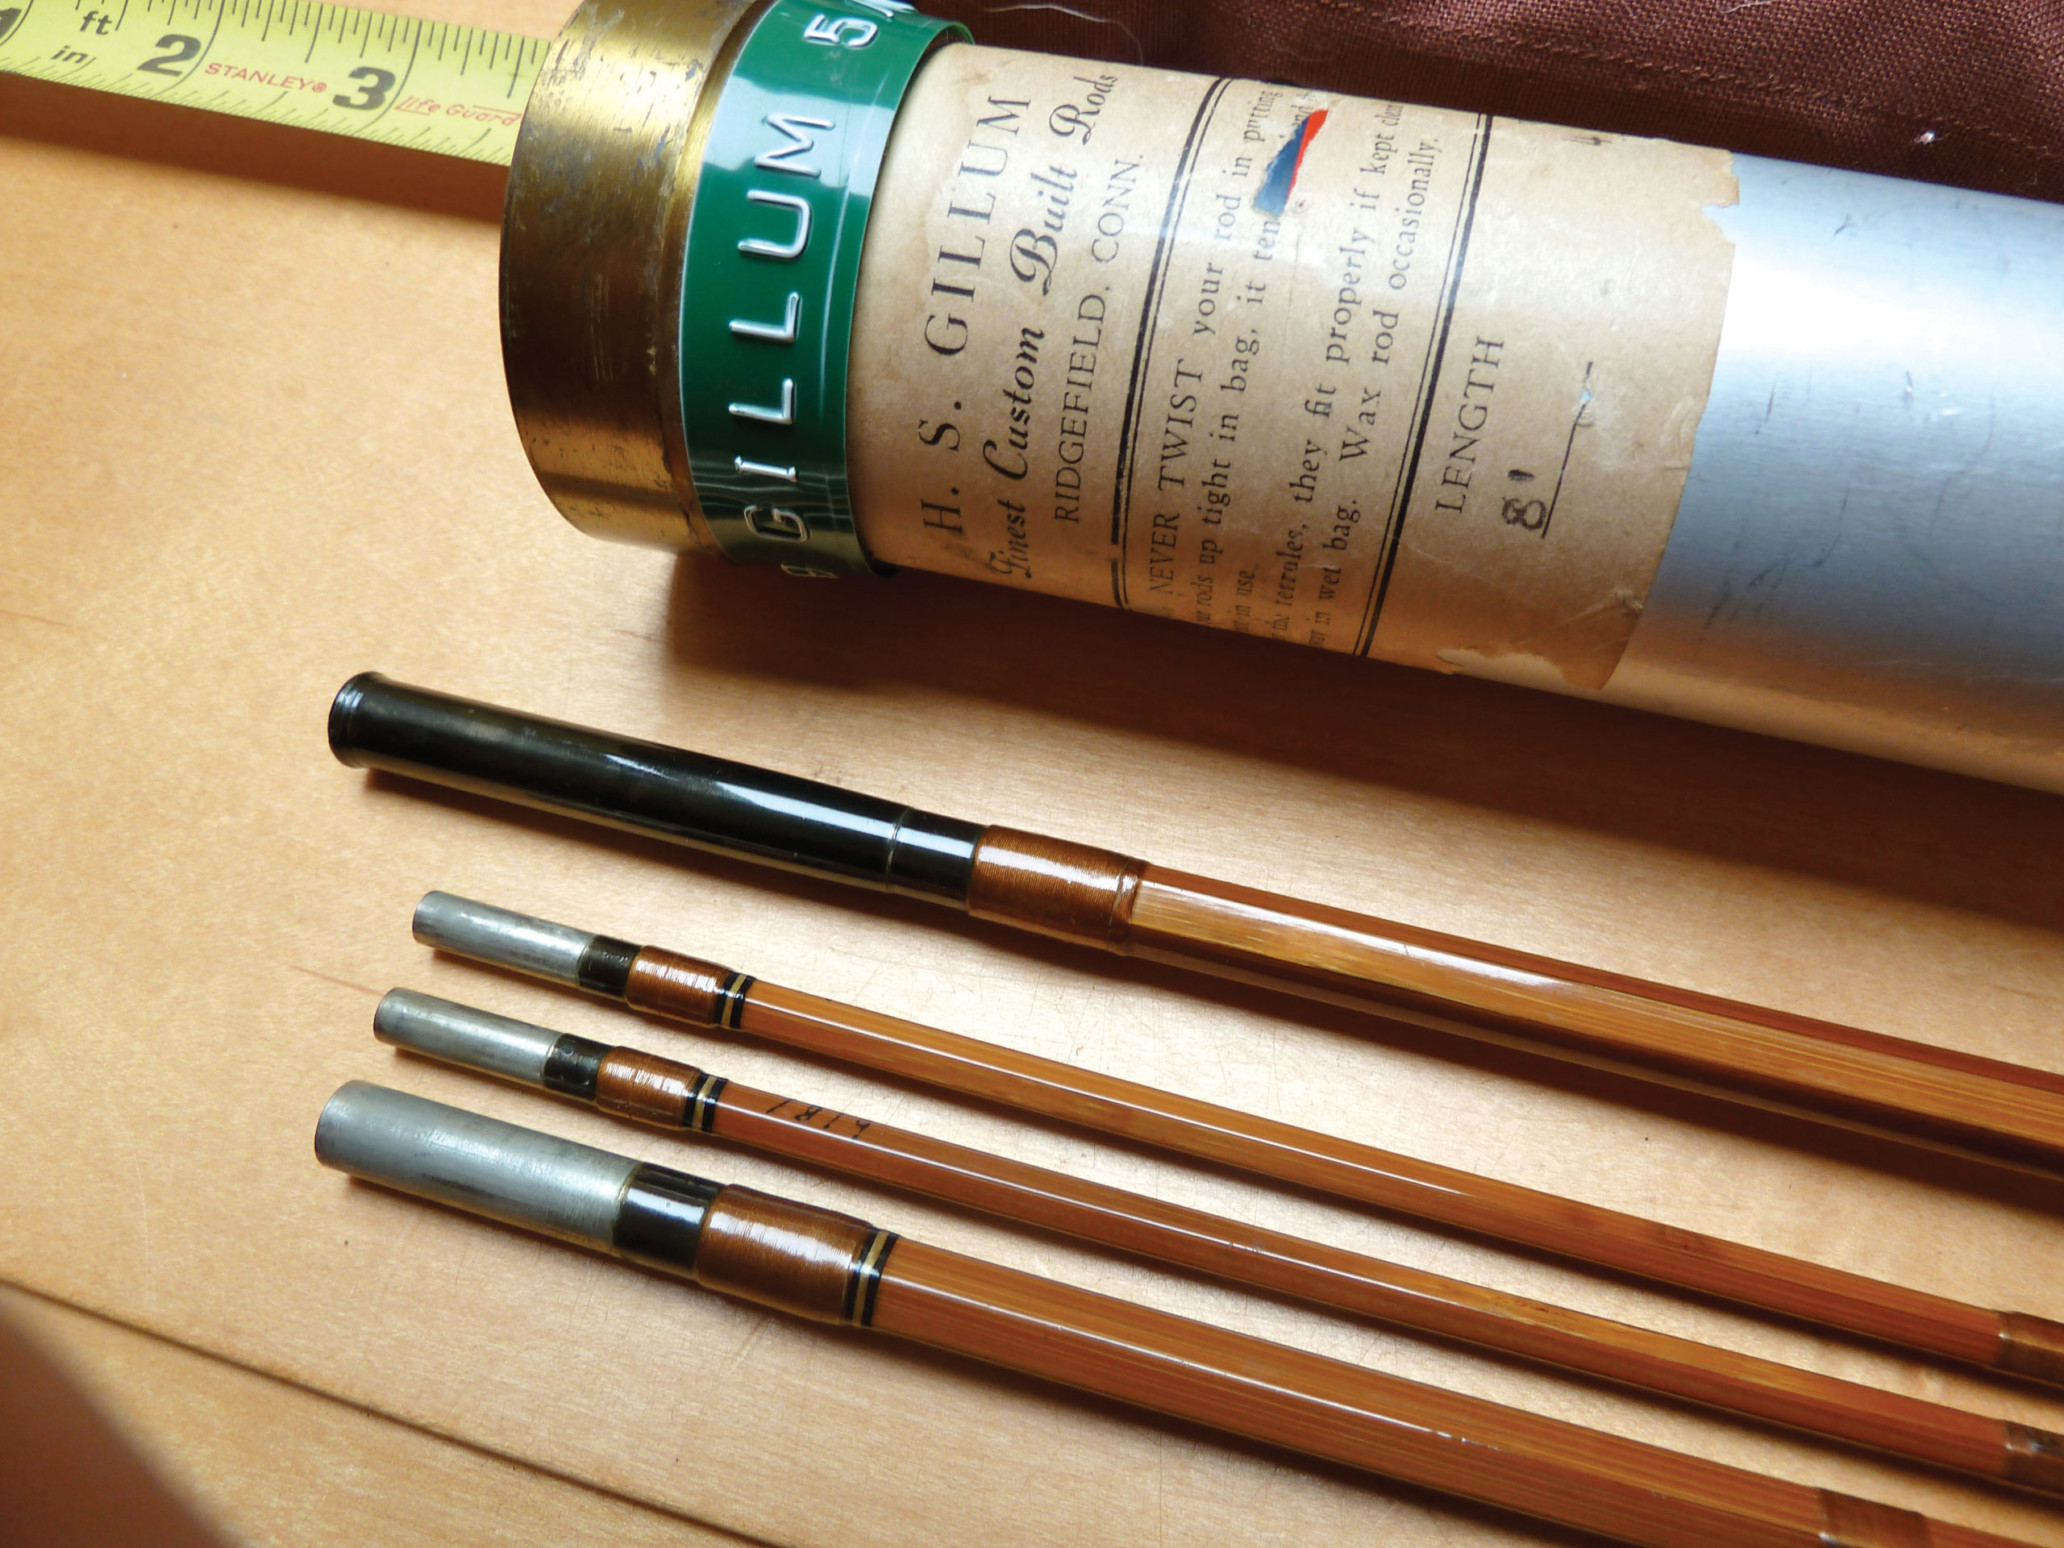 Go old-school with this handmade bamboo fishing pole